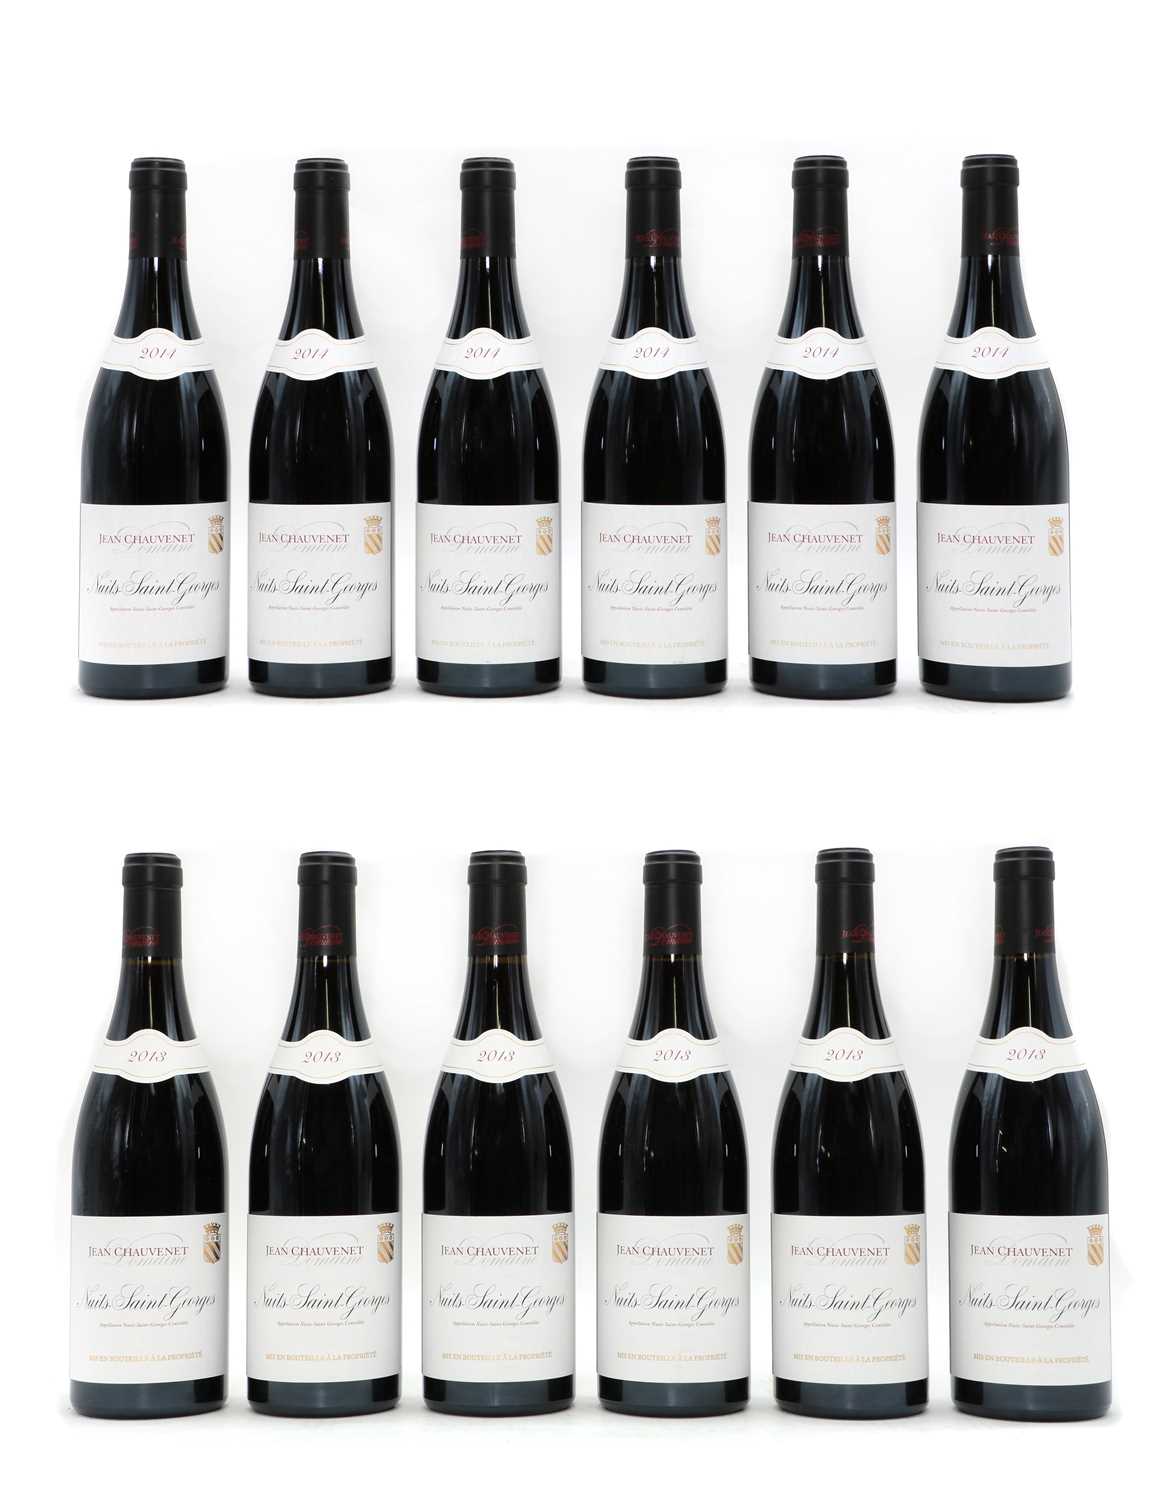 Lot 82 - Nuits-Saint-Georges, Domaine Jean Chauvenet, 2013 (6, boxed) and 2014 (6, boxed)